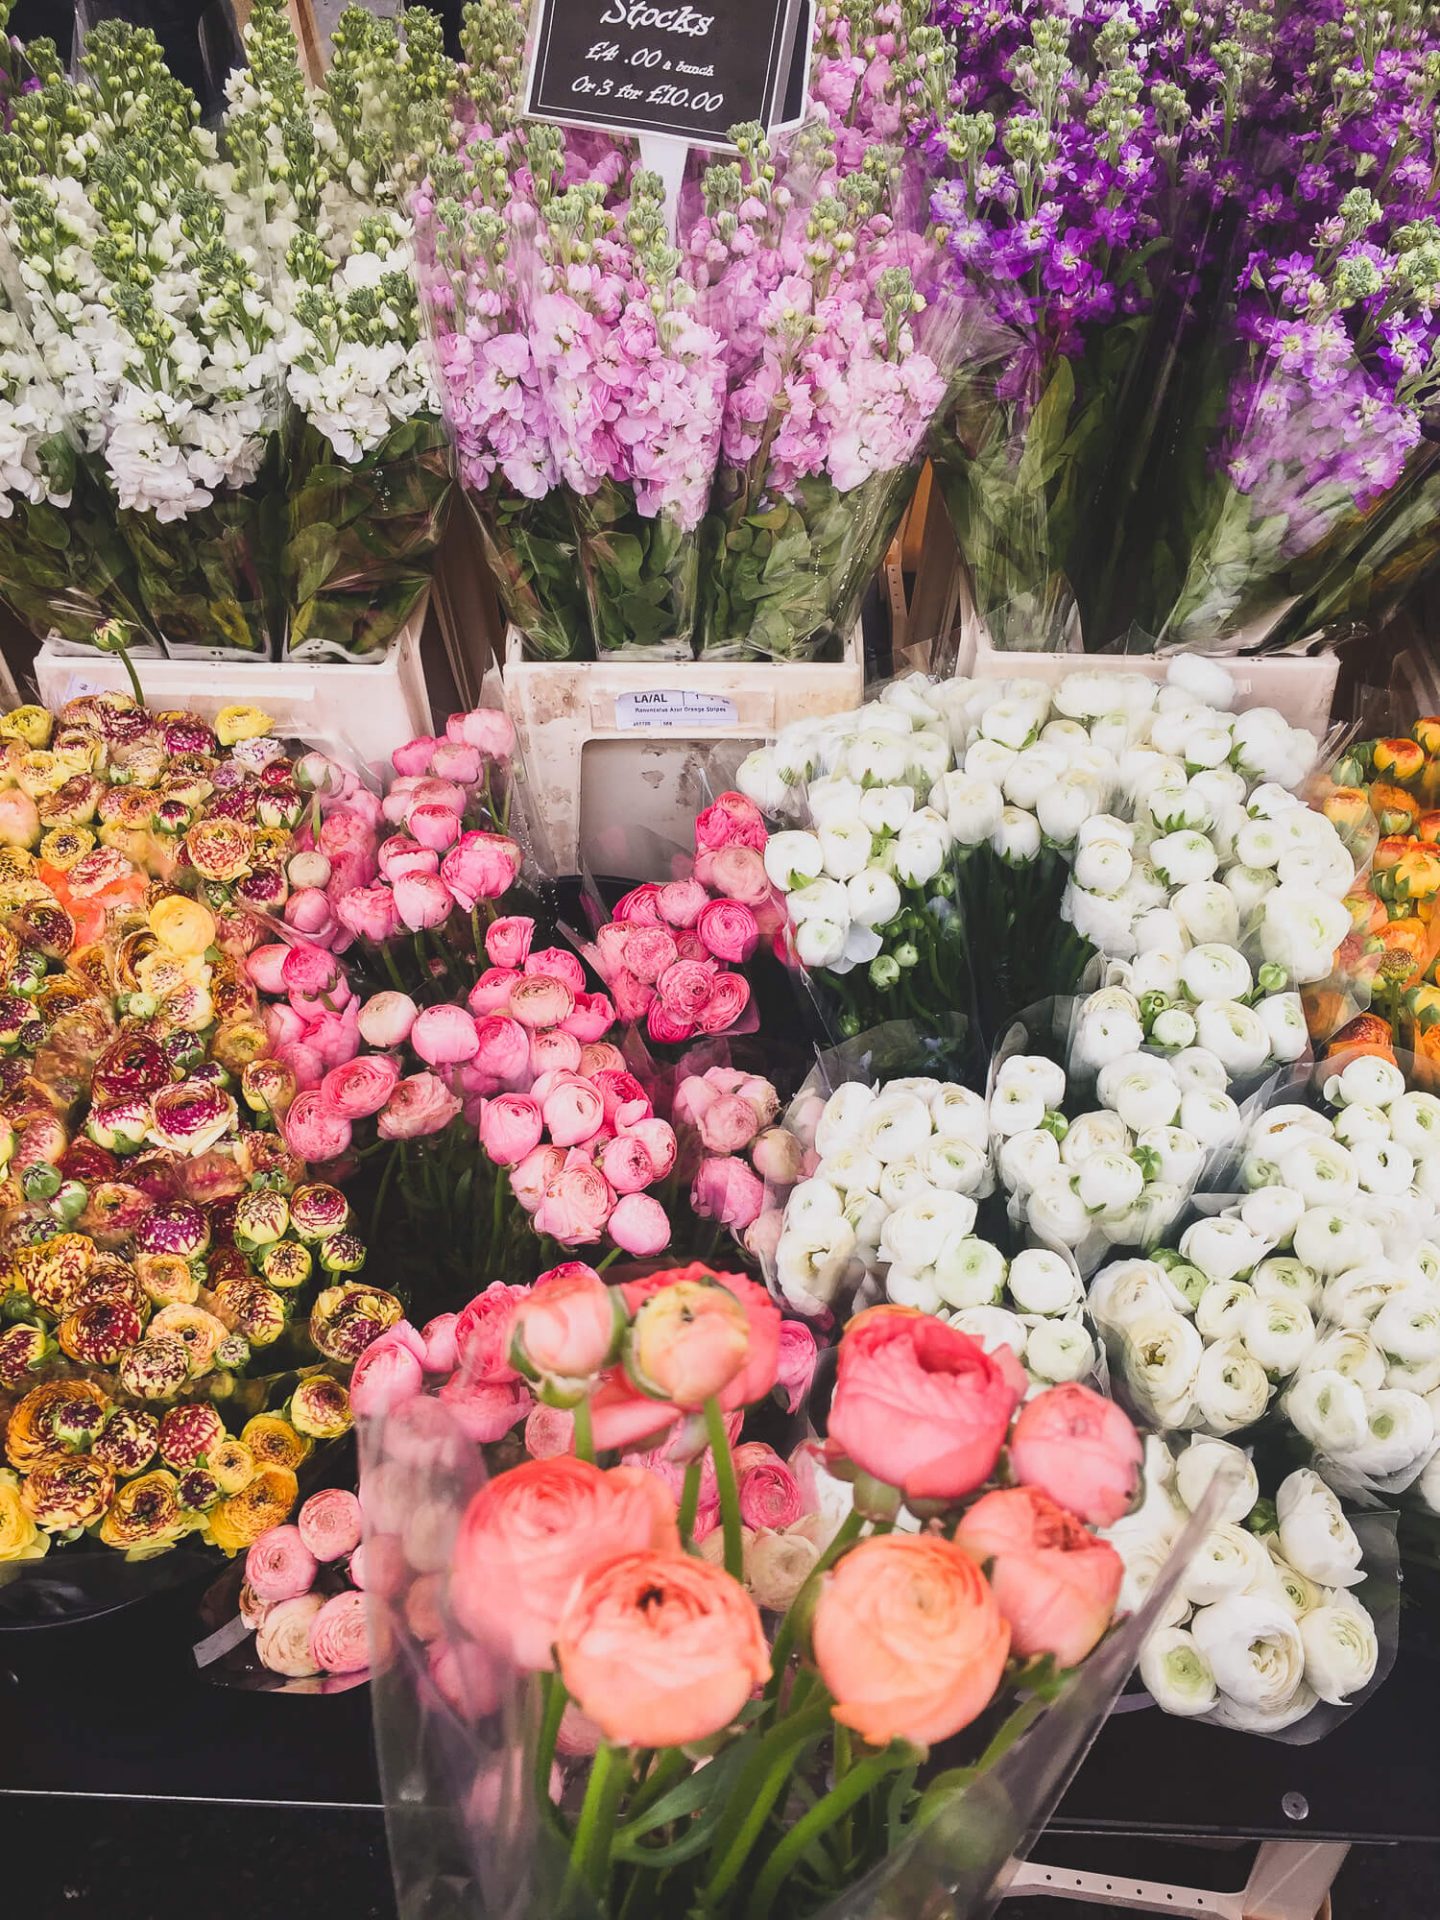 Top tips for Columbia Road Flower Market in London. Including when to go on Sundays and avoid the crowds. www.dalton-banks.co.uk